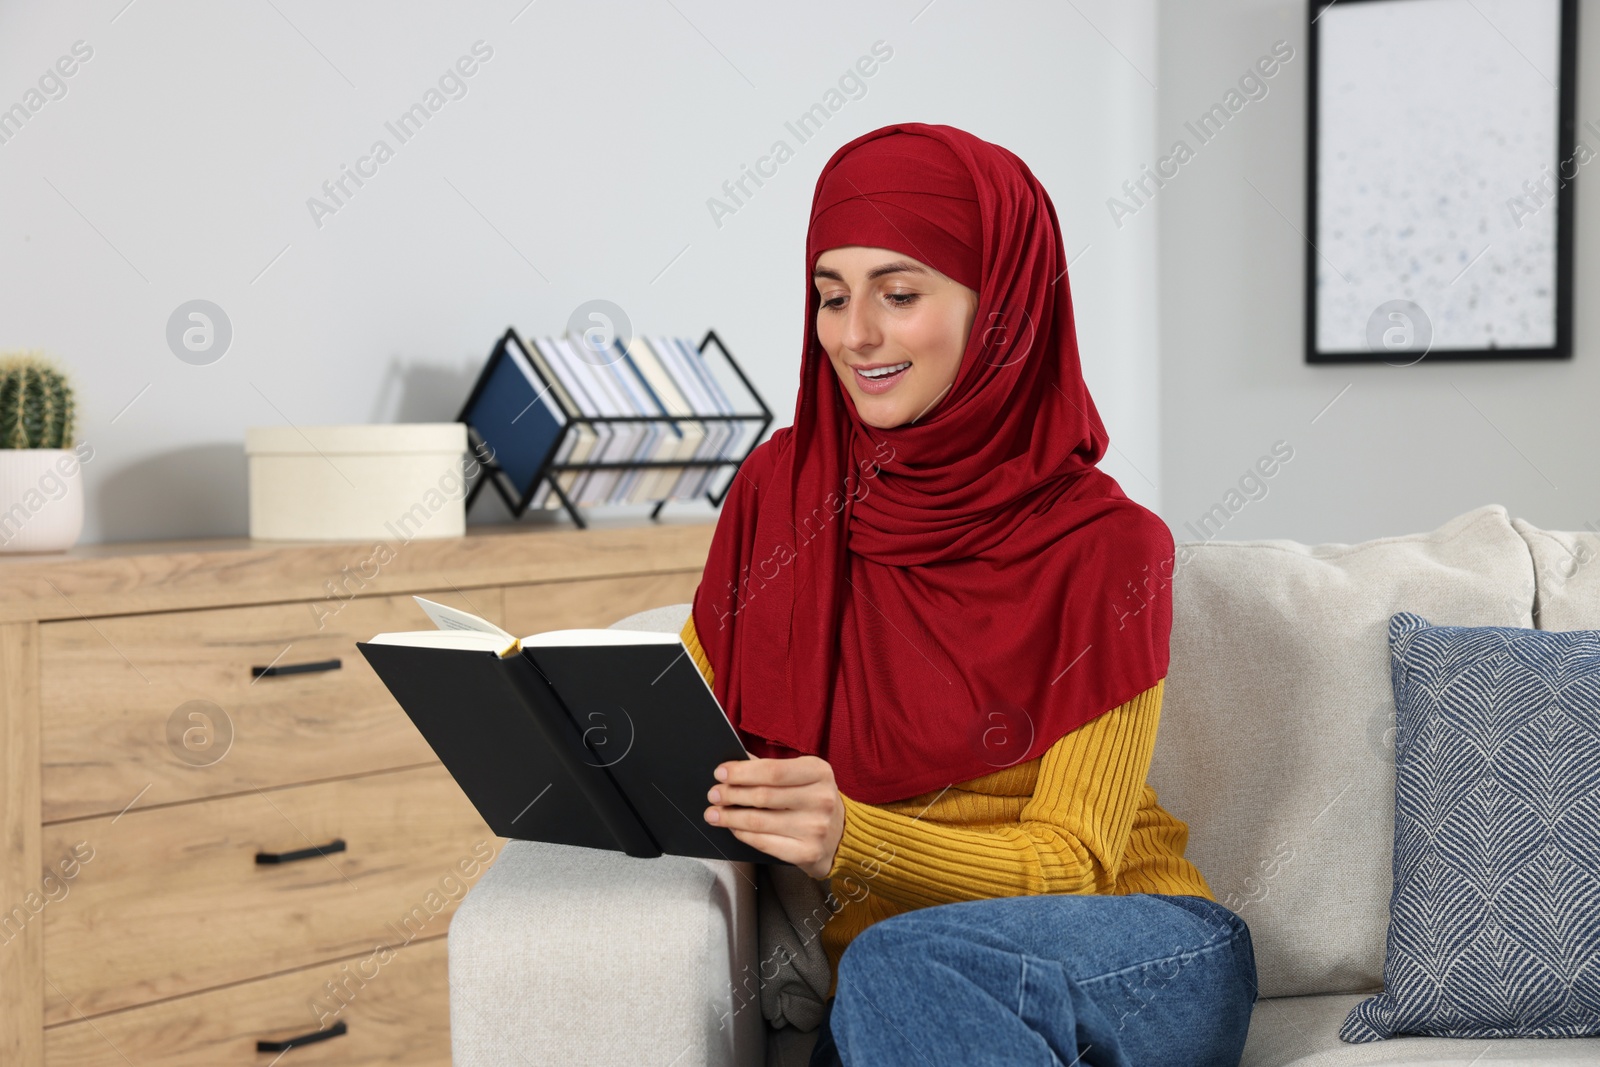 Photo of Muslim woman reading book on couch in room